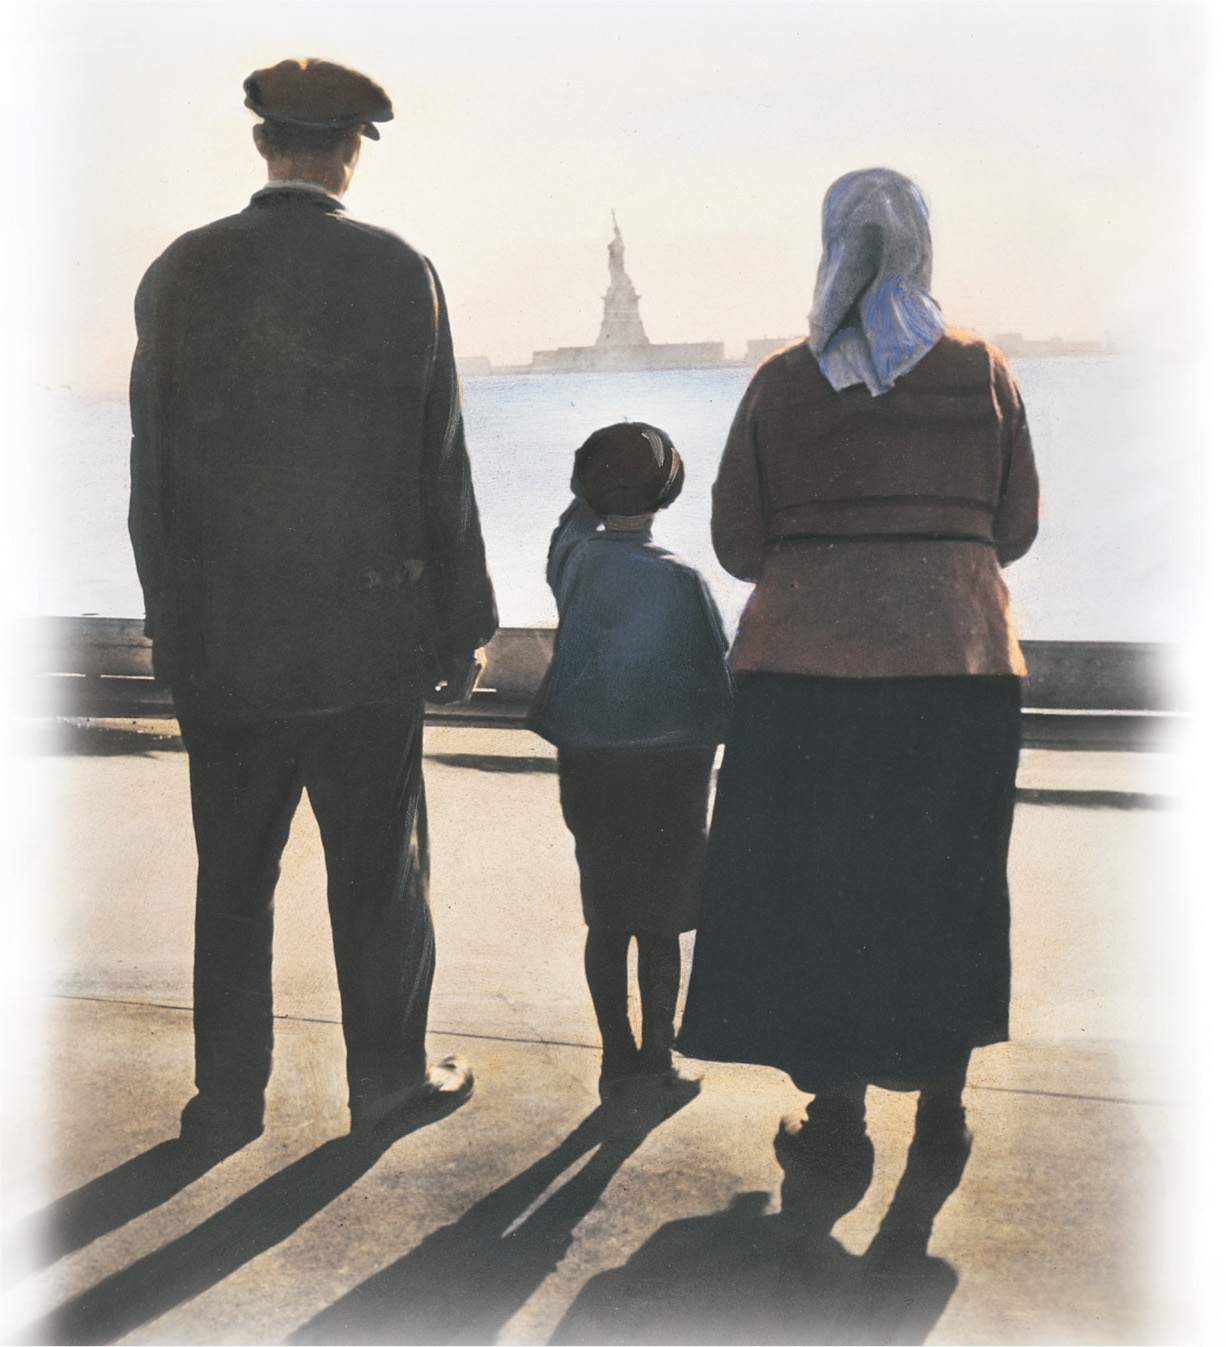 A photo: a family stares at the Statue of Liberty.